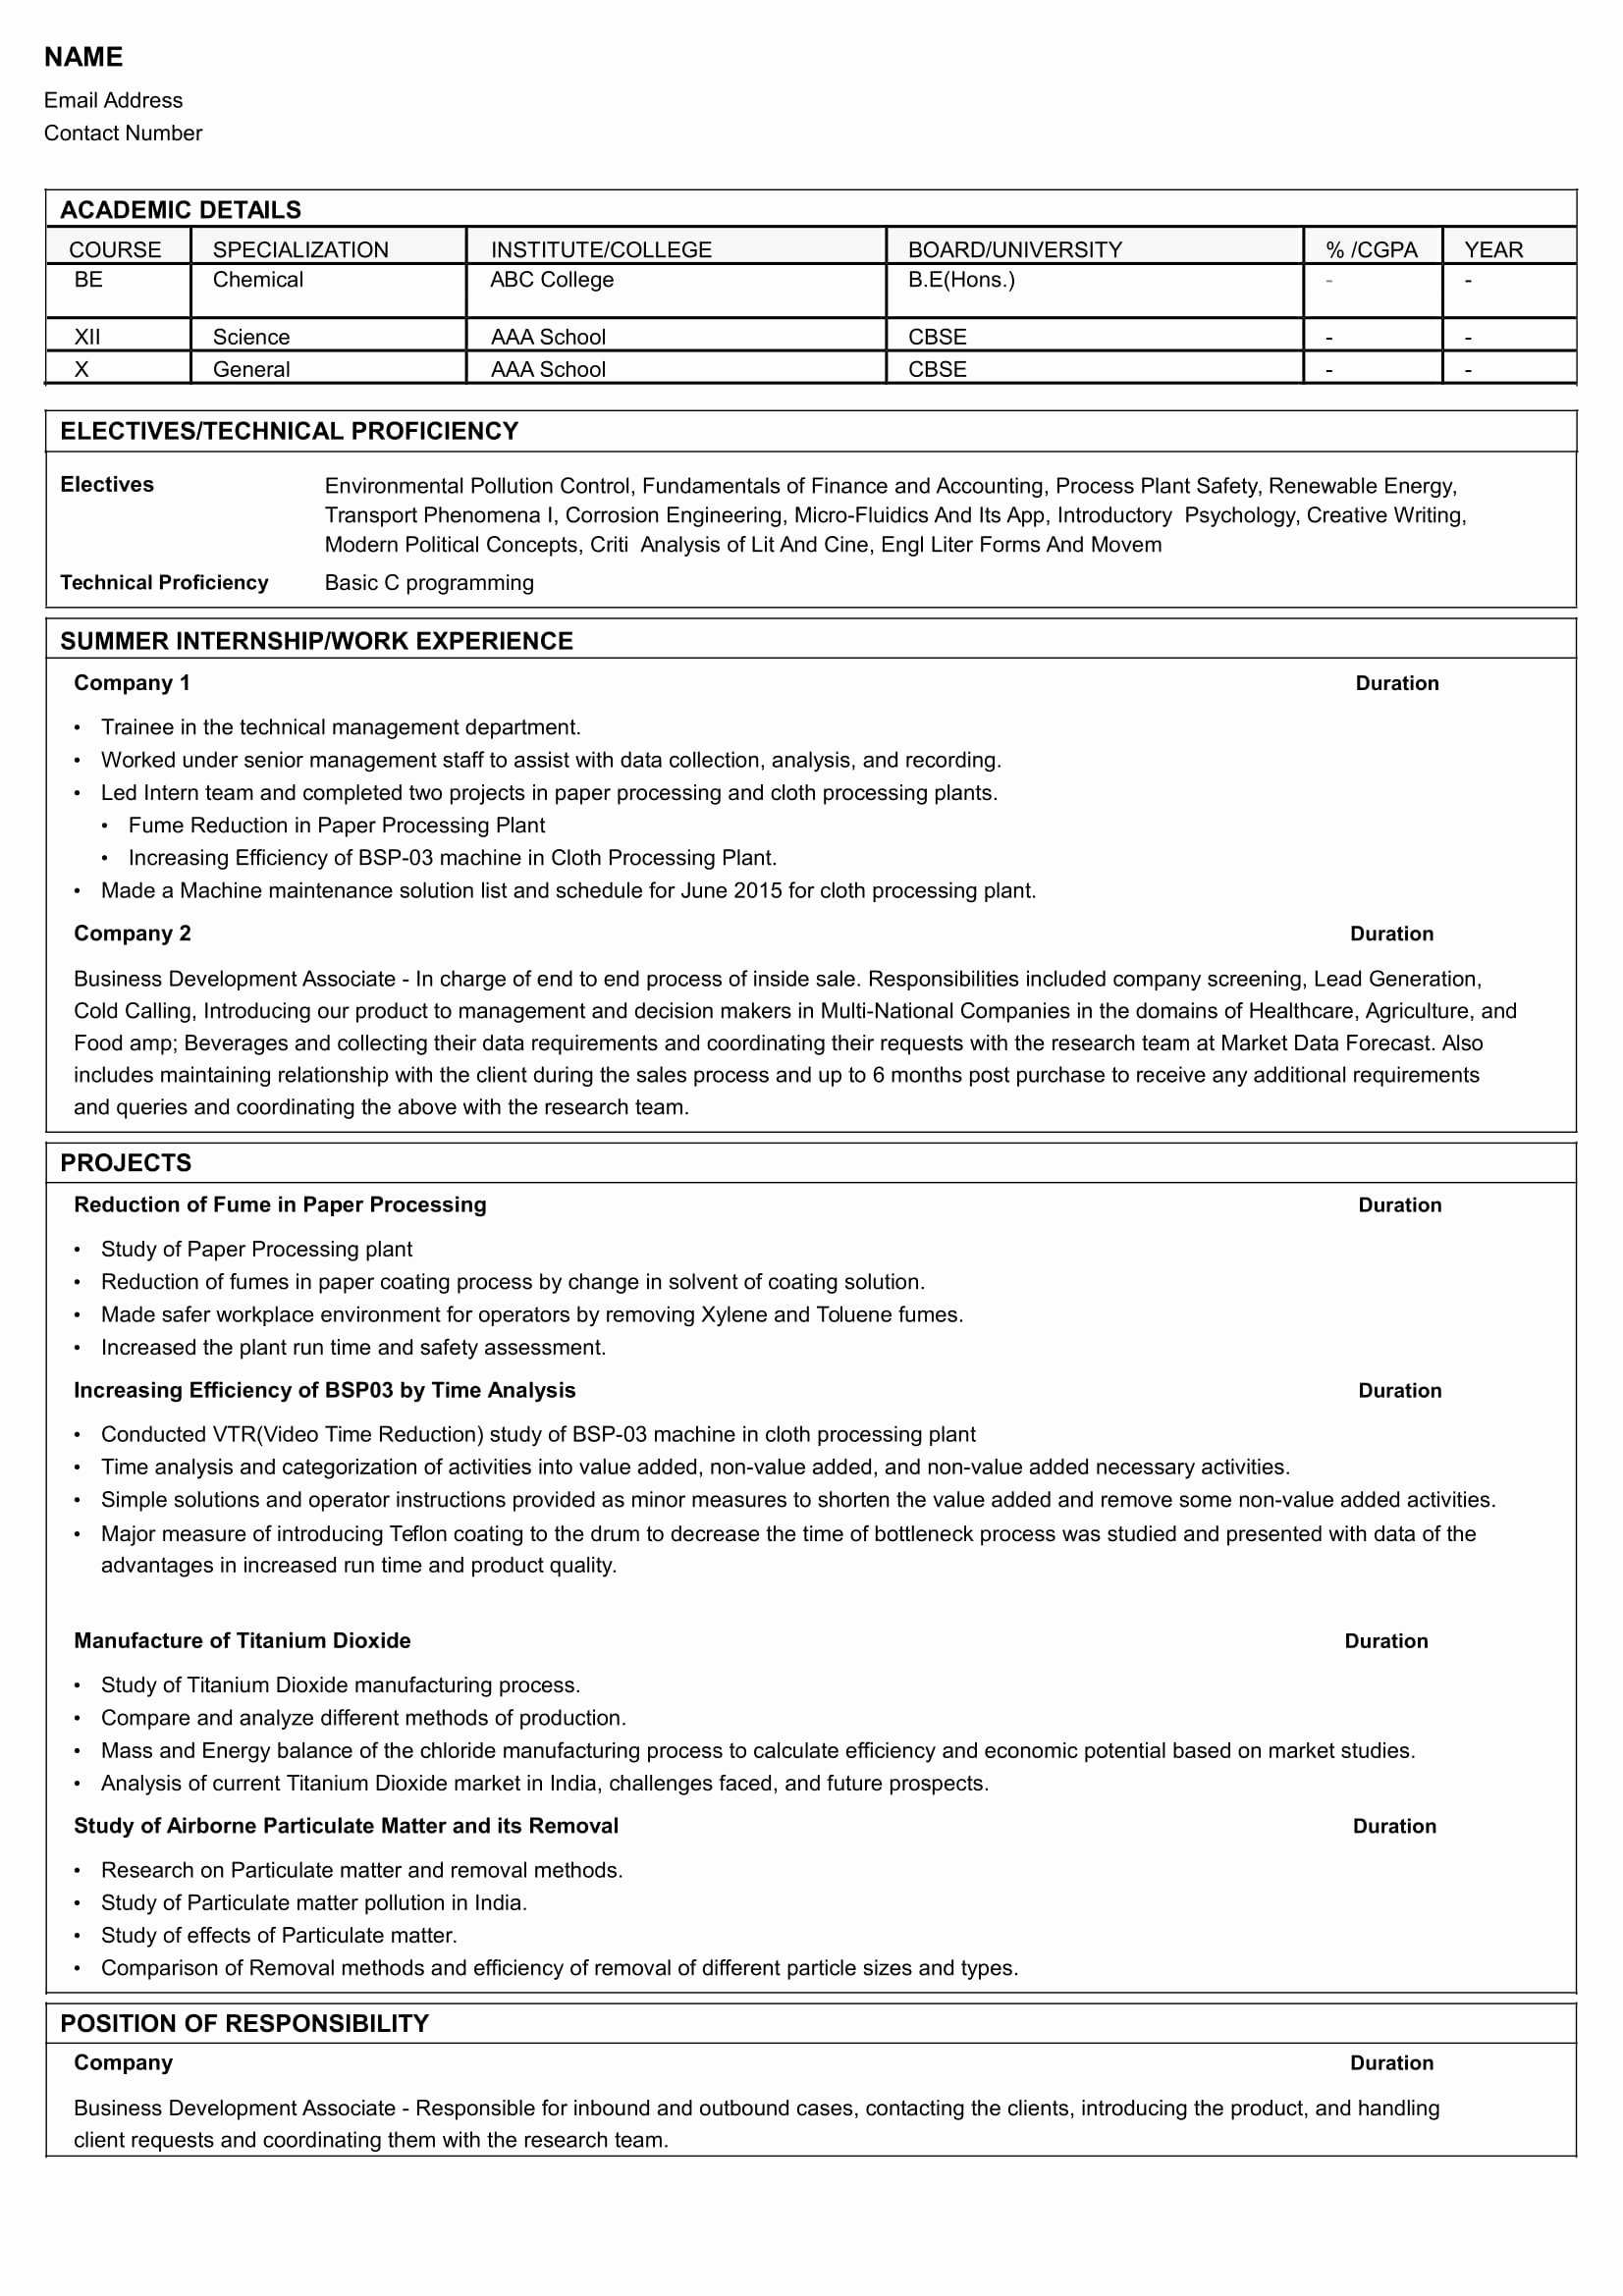 Sample Resume for Freshers Luxury 32 Resume Templates for Freshers Download Free Word format